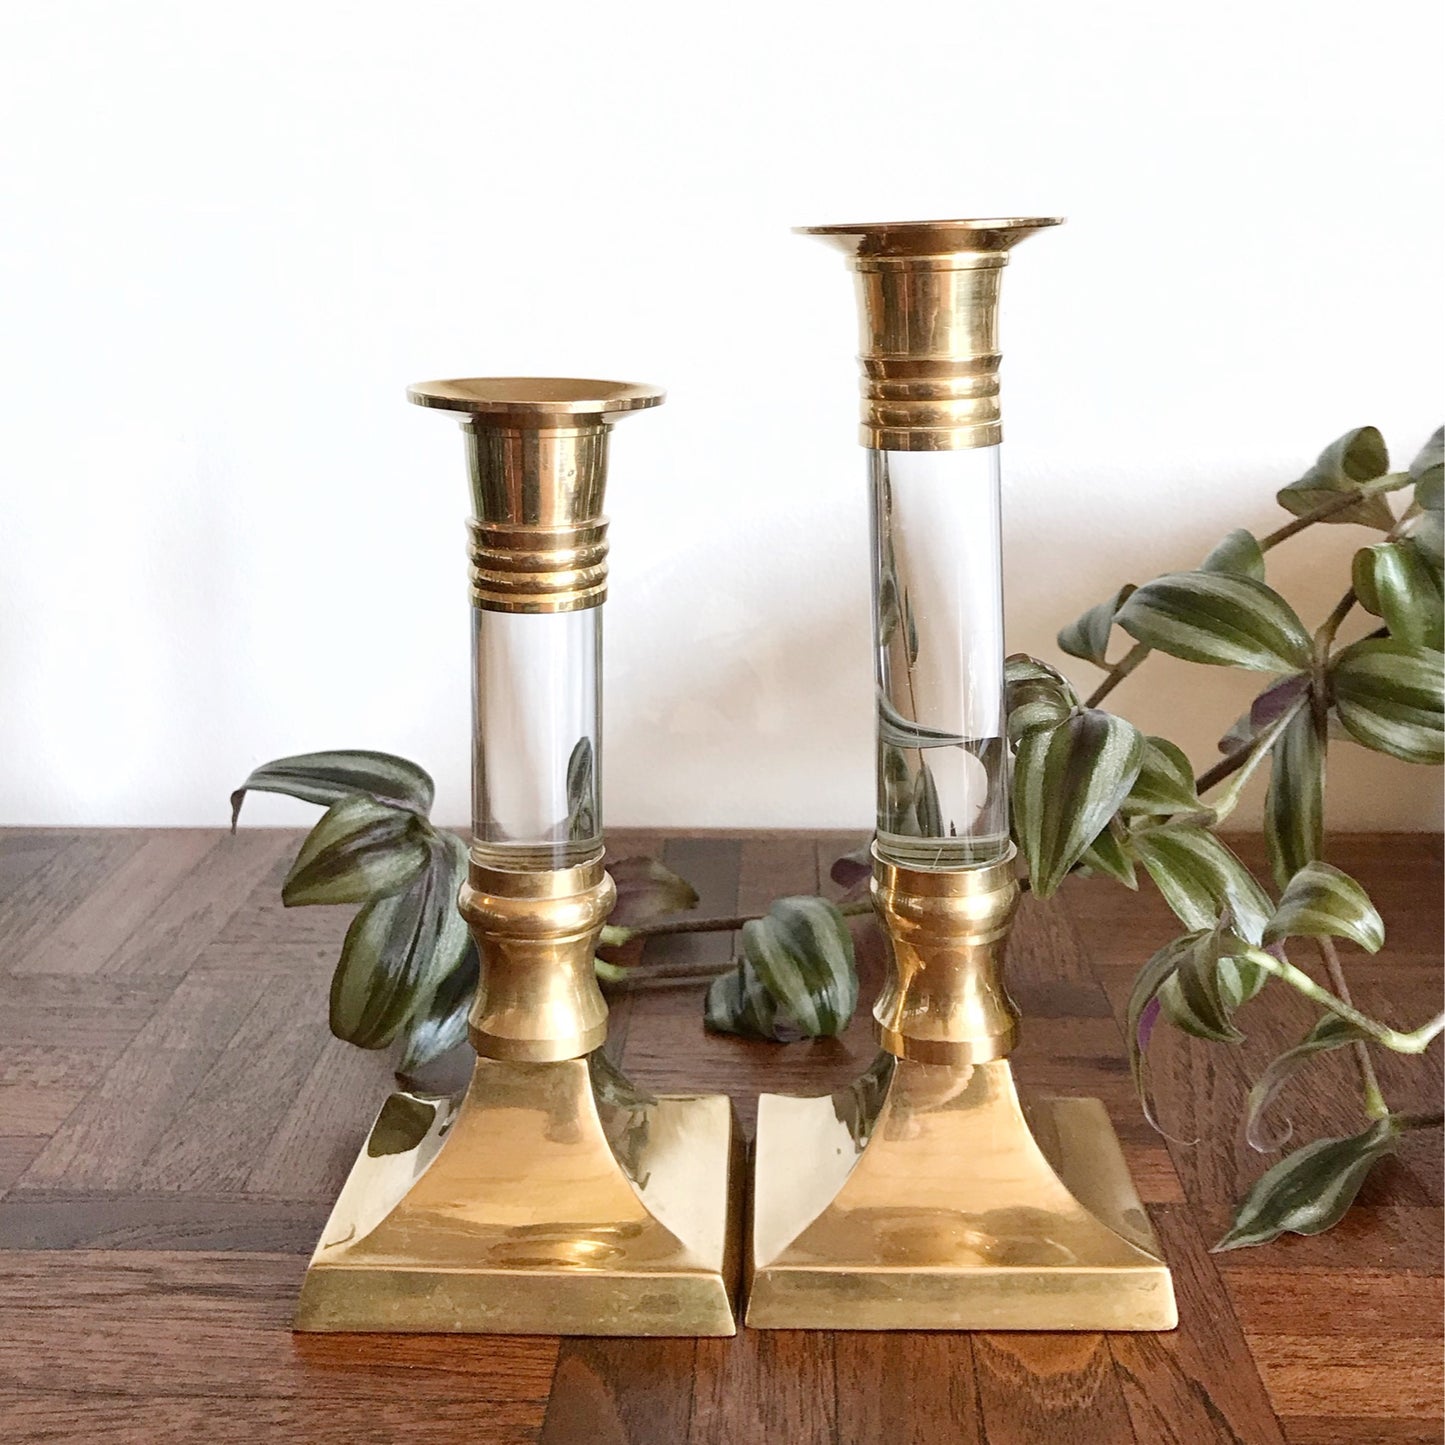 Pair of Vintage Brass & Acrylic Candle Holders